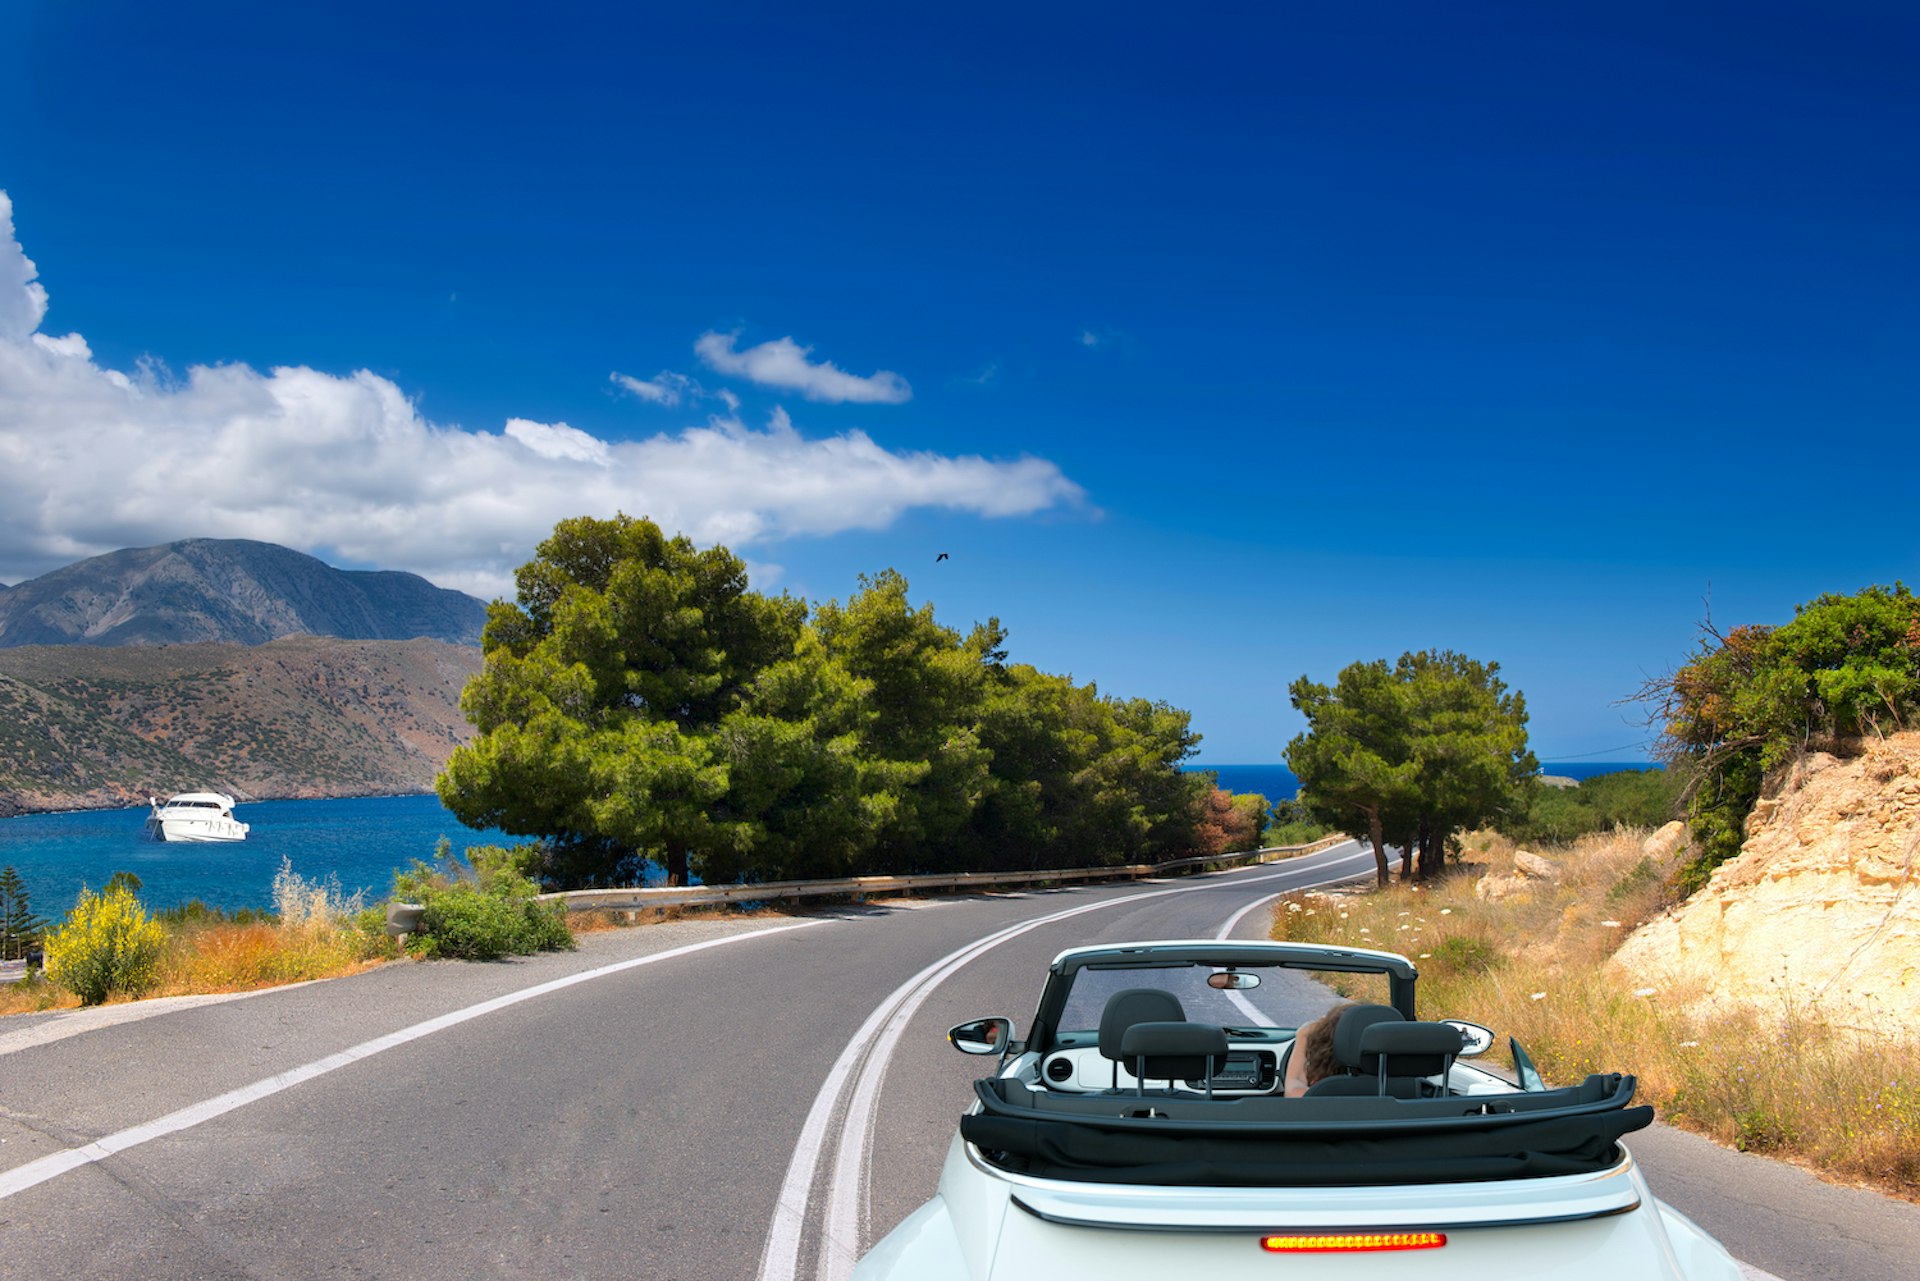 A convertible on the open road by the sea in Crete, Greece